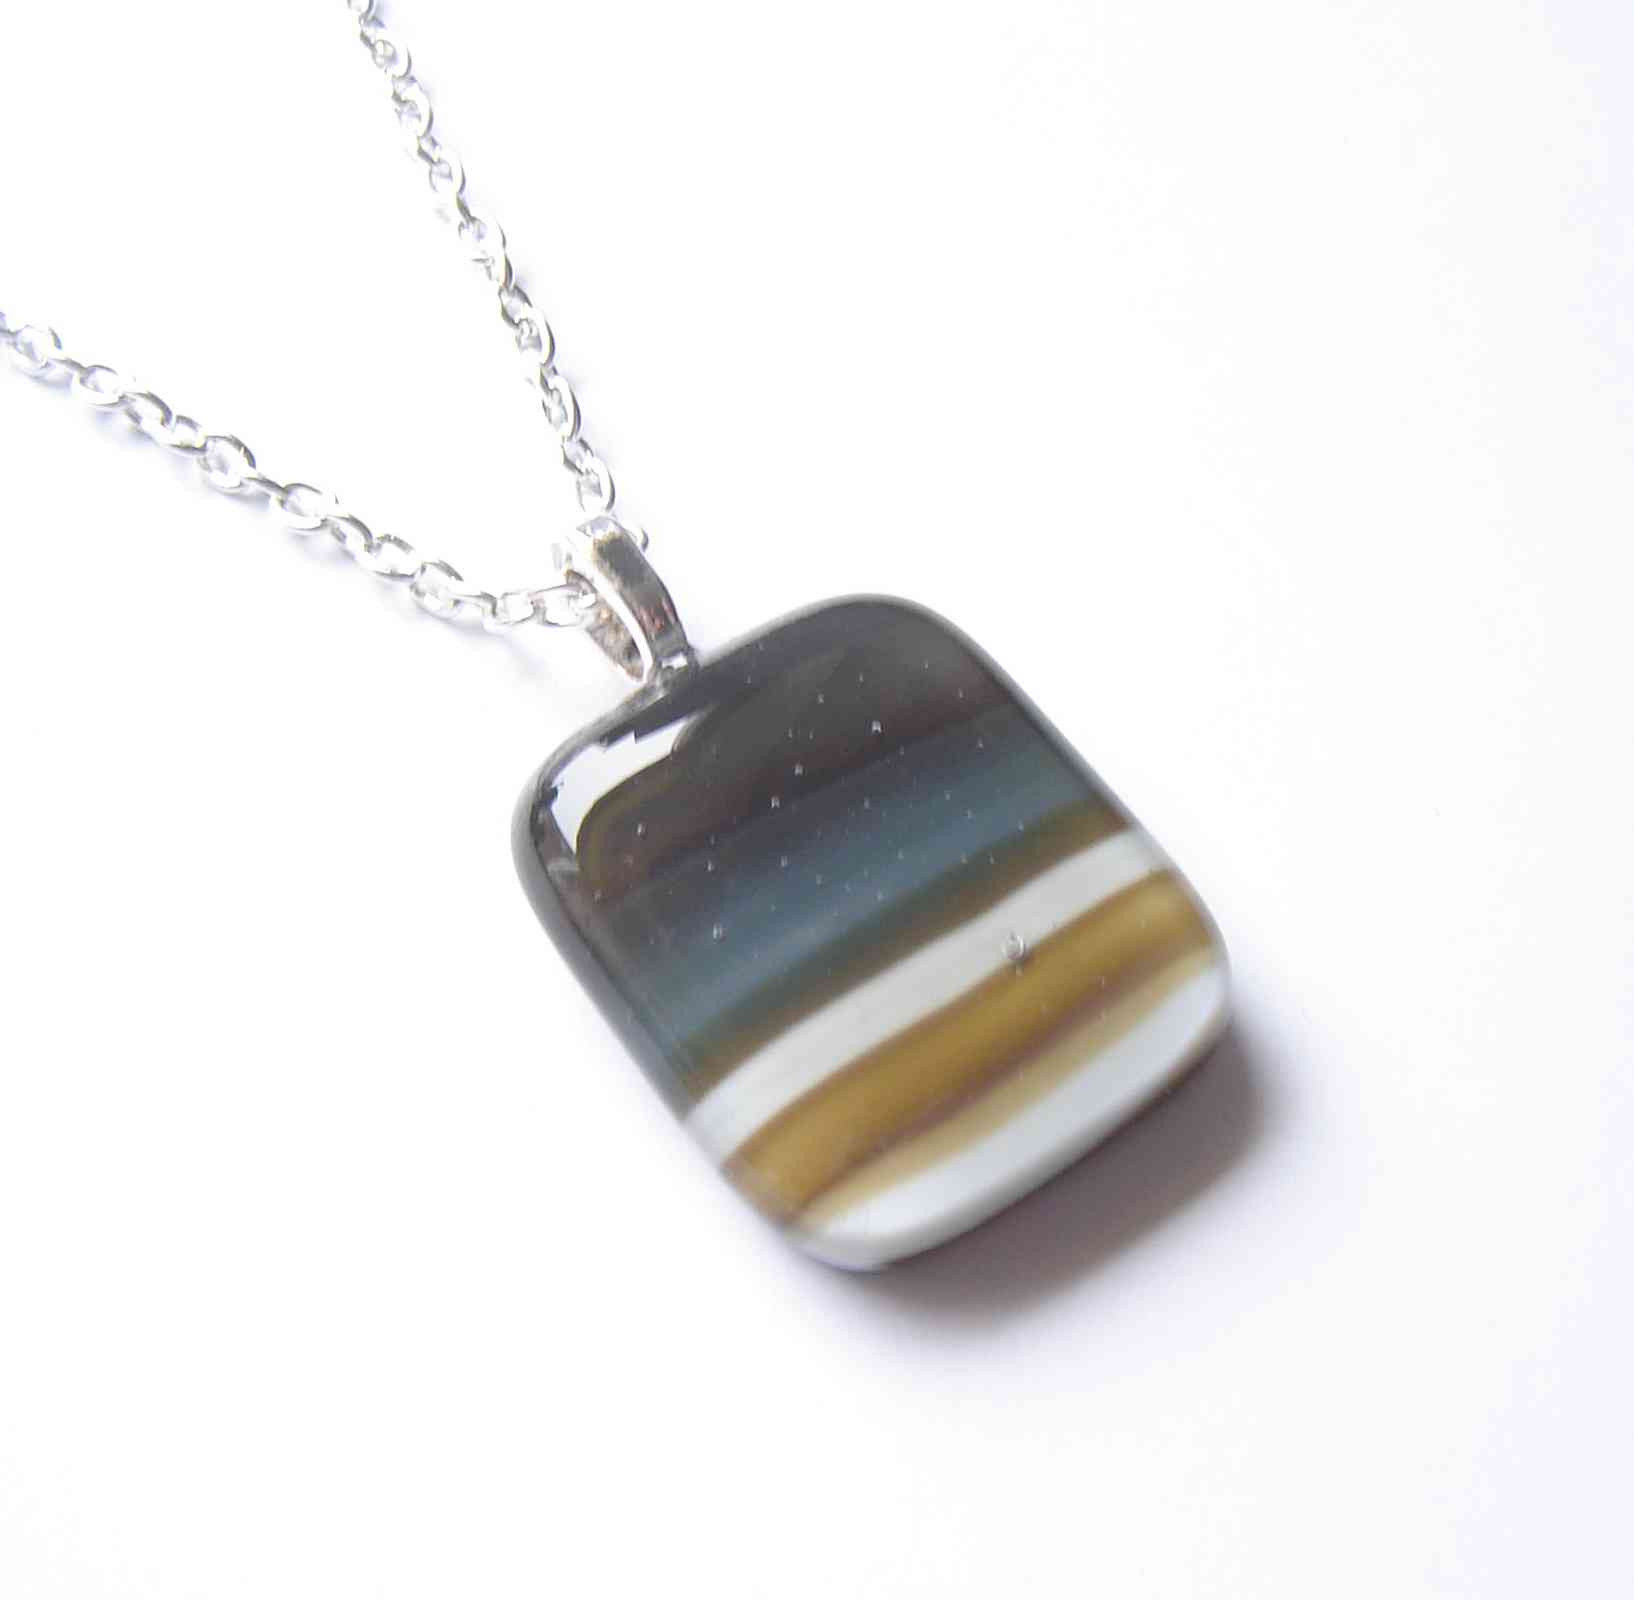 Fused and cast glass jewellery designed and handmade in the north-east of England